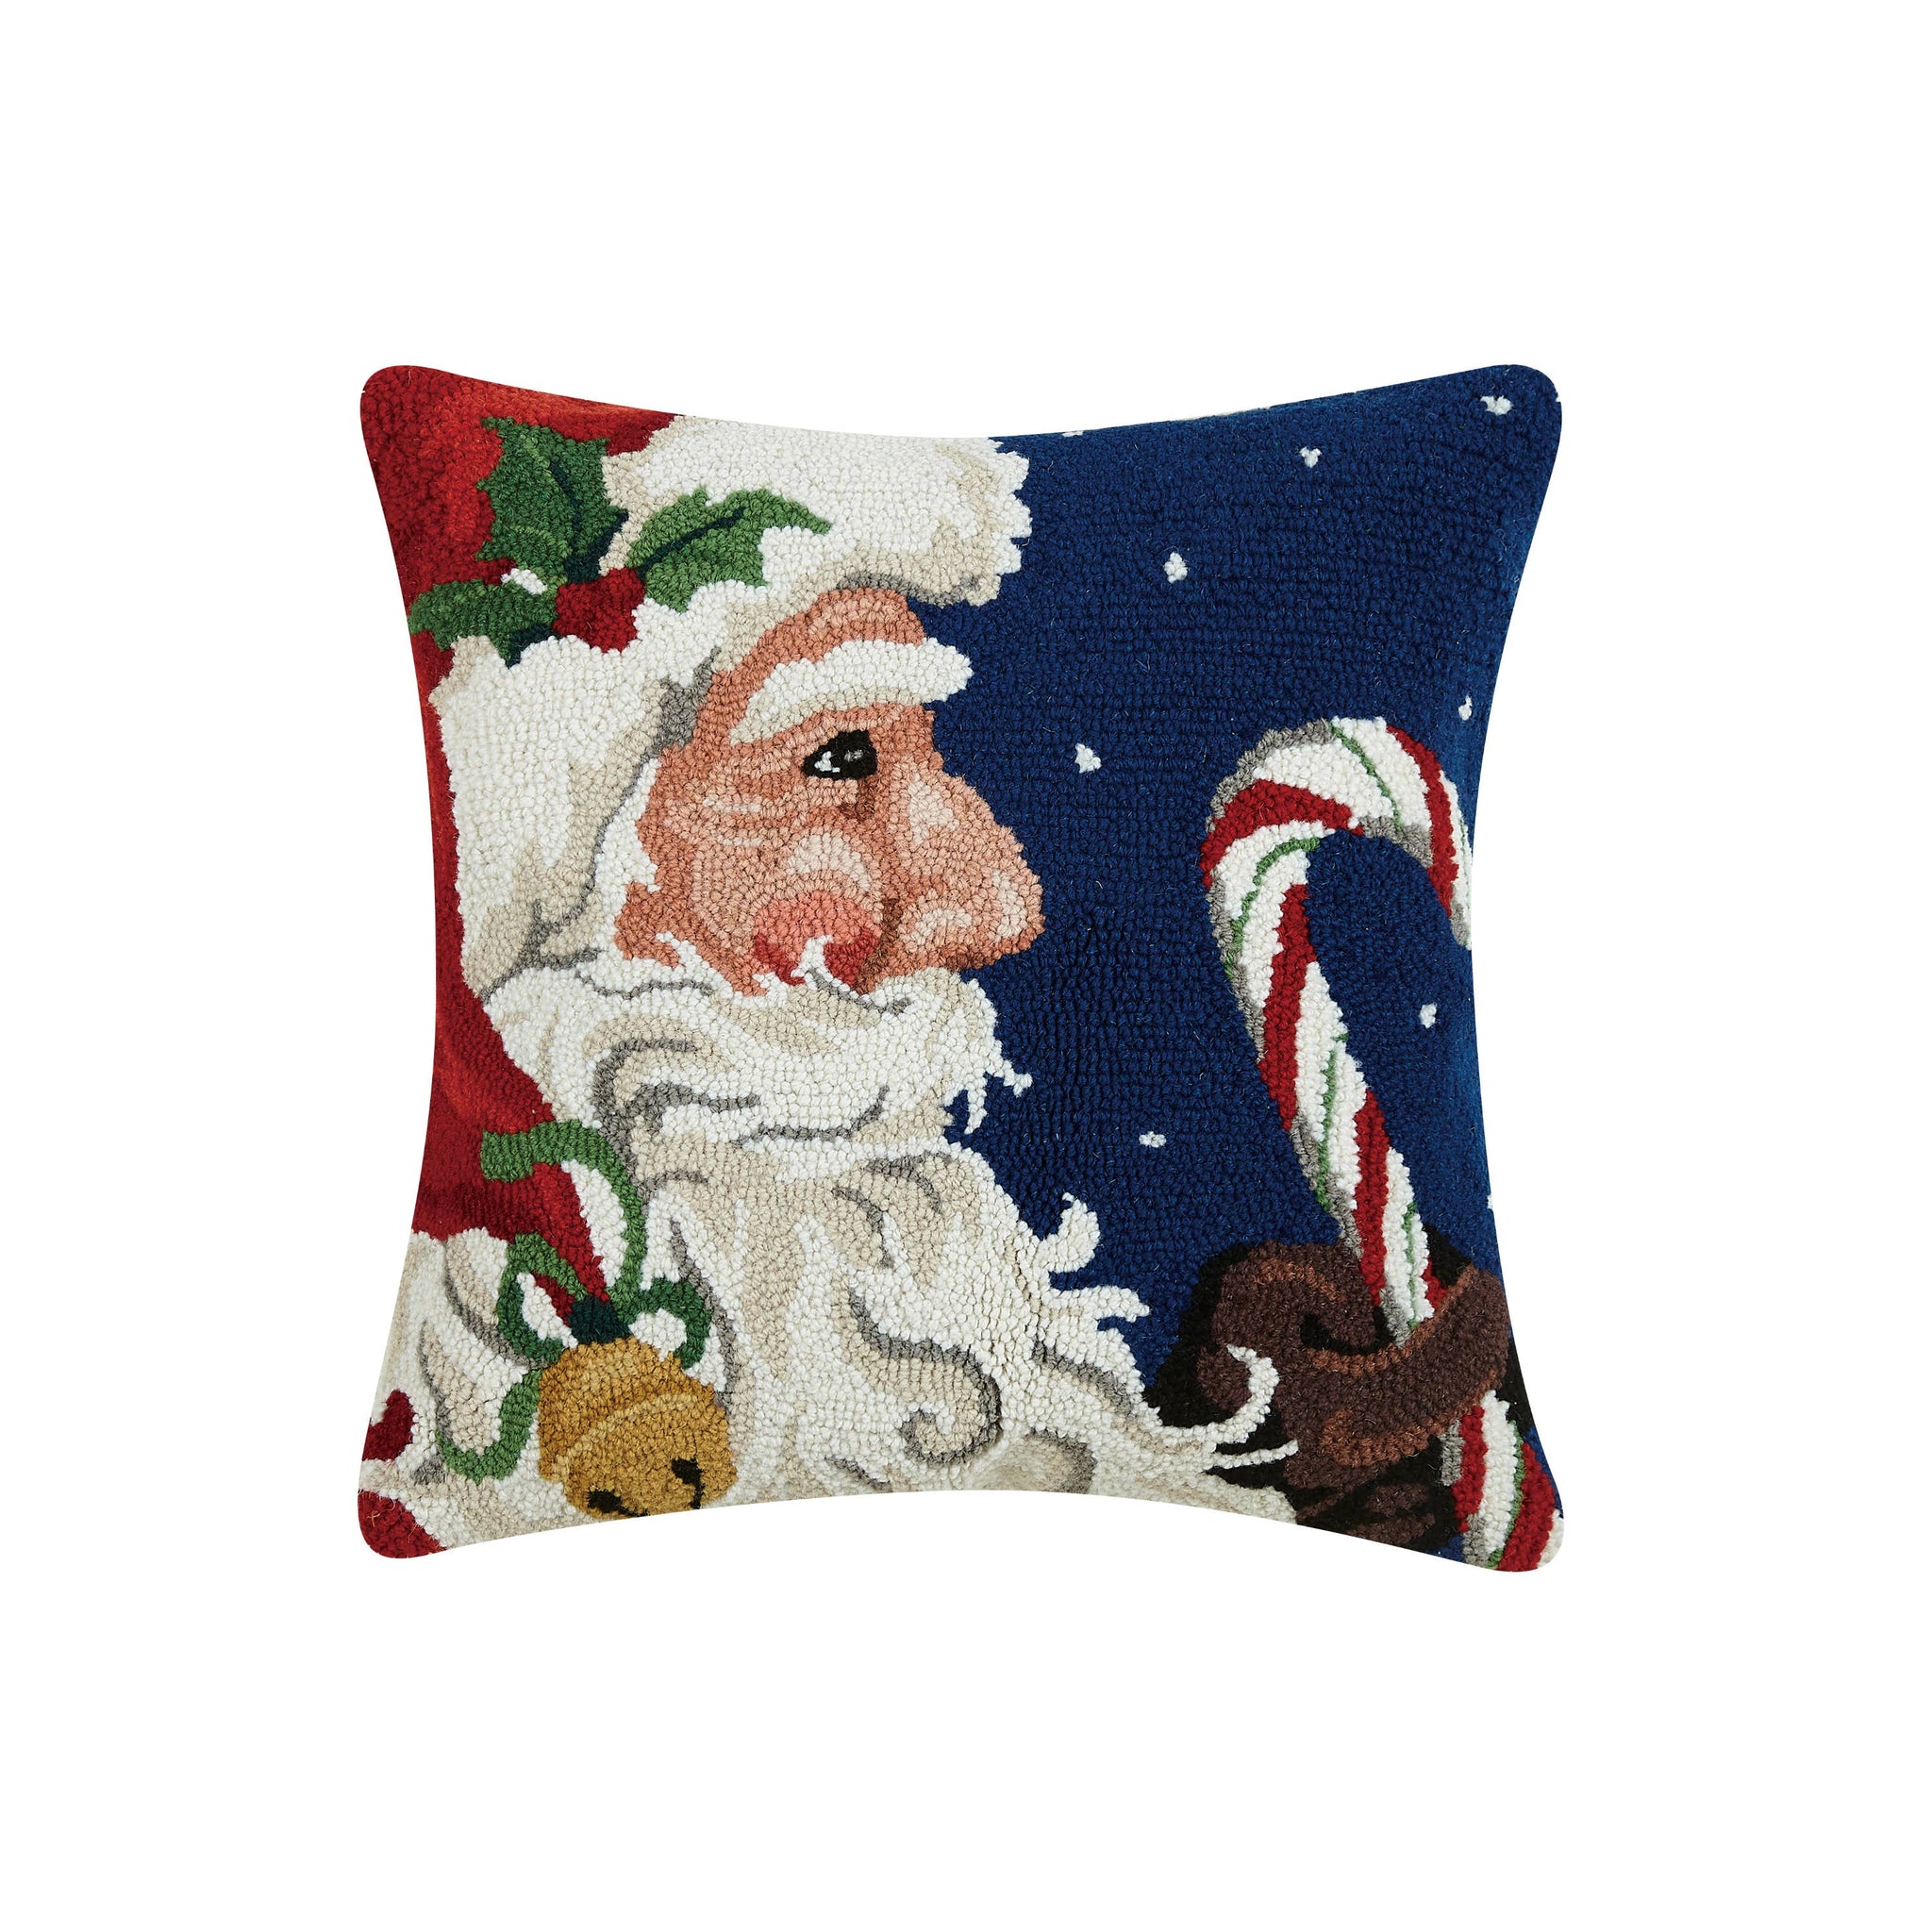 Santa With Candy Cane Hook Pillow